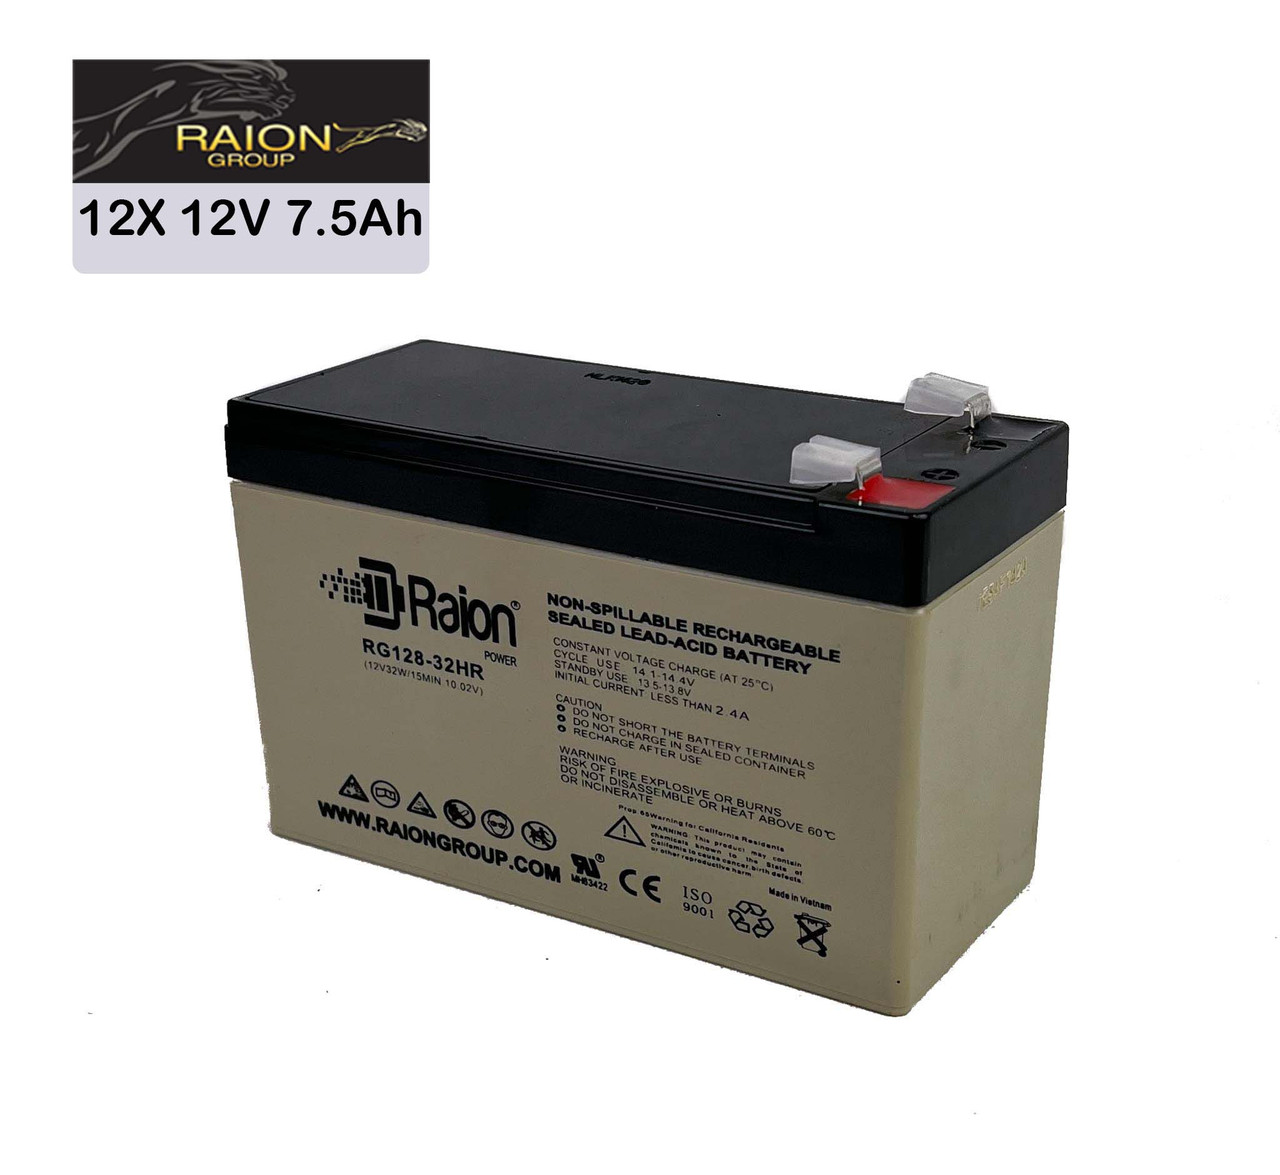 Raion Power 12V 7.5Ah High Rate Discharge UPS Batteries for Alpha Technologies PINBP 1000T - 12 Pack